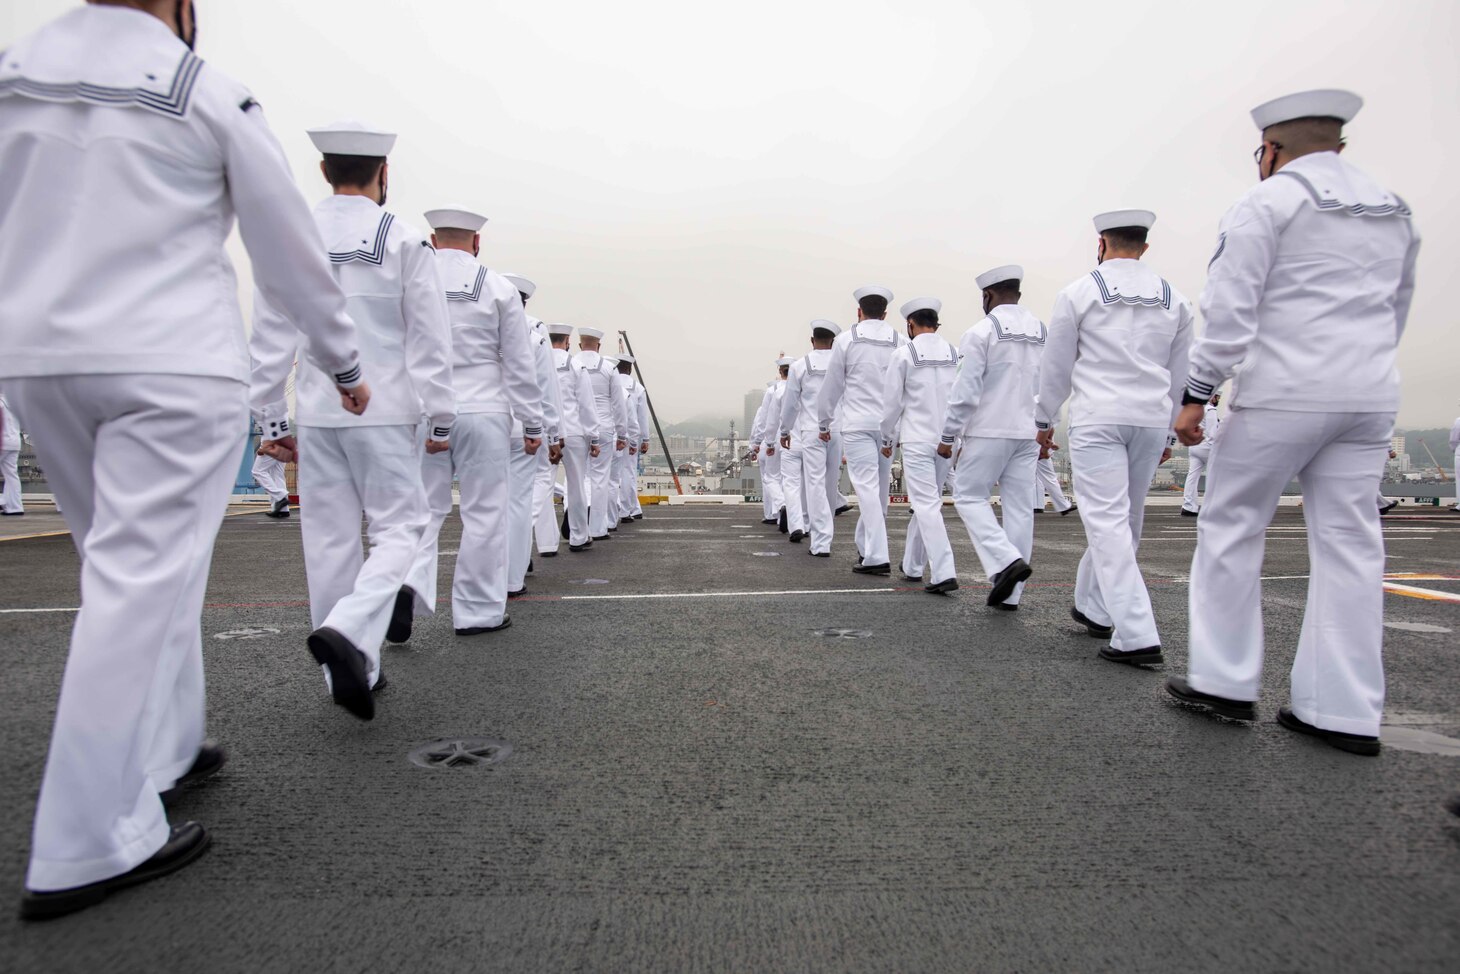 210519-N-WU964-1092 YOKOSUKA, Japan (May 19, 2021) Sailors man the rails on the flight deck of the U.S. Navy’s only forward-deployed aircraft carrier USS Ronald Reagan (CVN 76) as it departs Commander, Fleet Activities Yokosuka, Japan. Ronald Reagan, the flagship of Carrier Strike Group 5, provides a combat-ready force that protects and defends the United States, as well as the collective maritime interests of its allies and partners in the Indo-Pacific region. (U.S. Navy photo by Mass Communication Specialist Seaman Apprentice Dallas Snider)